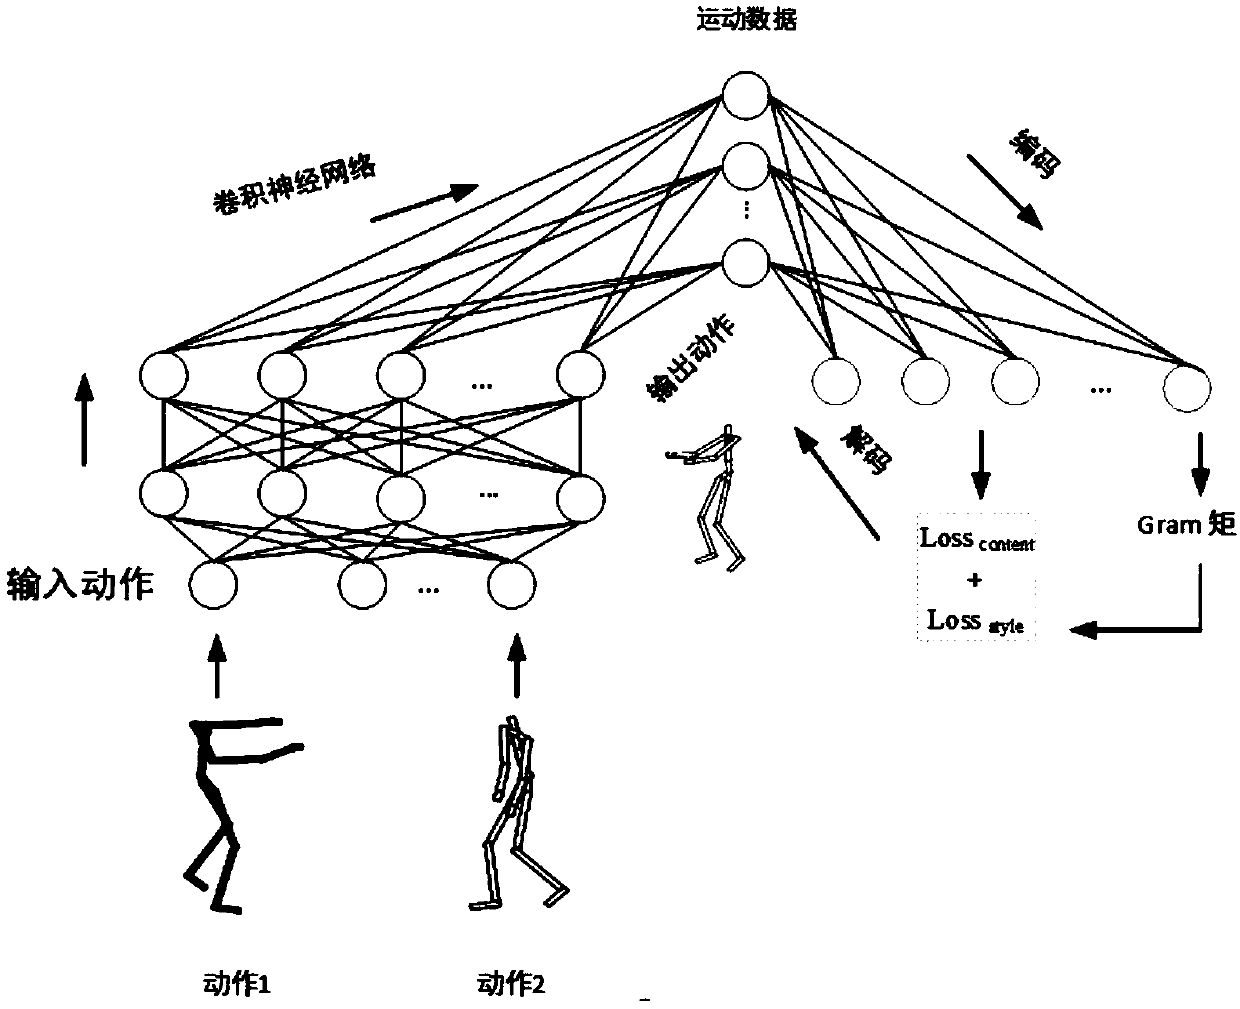 Human motion synthesis method based on a convolutional neural network